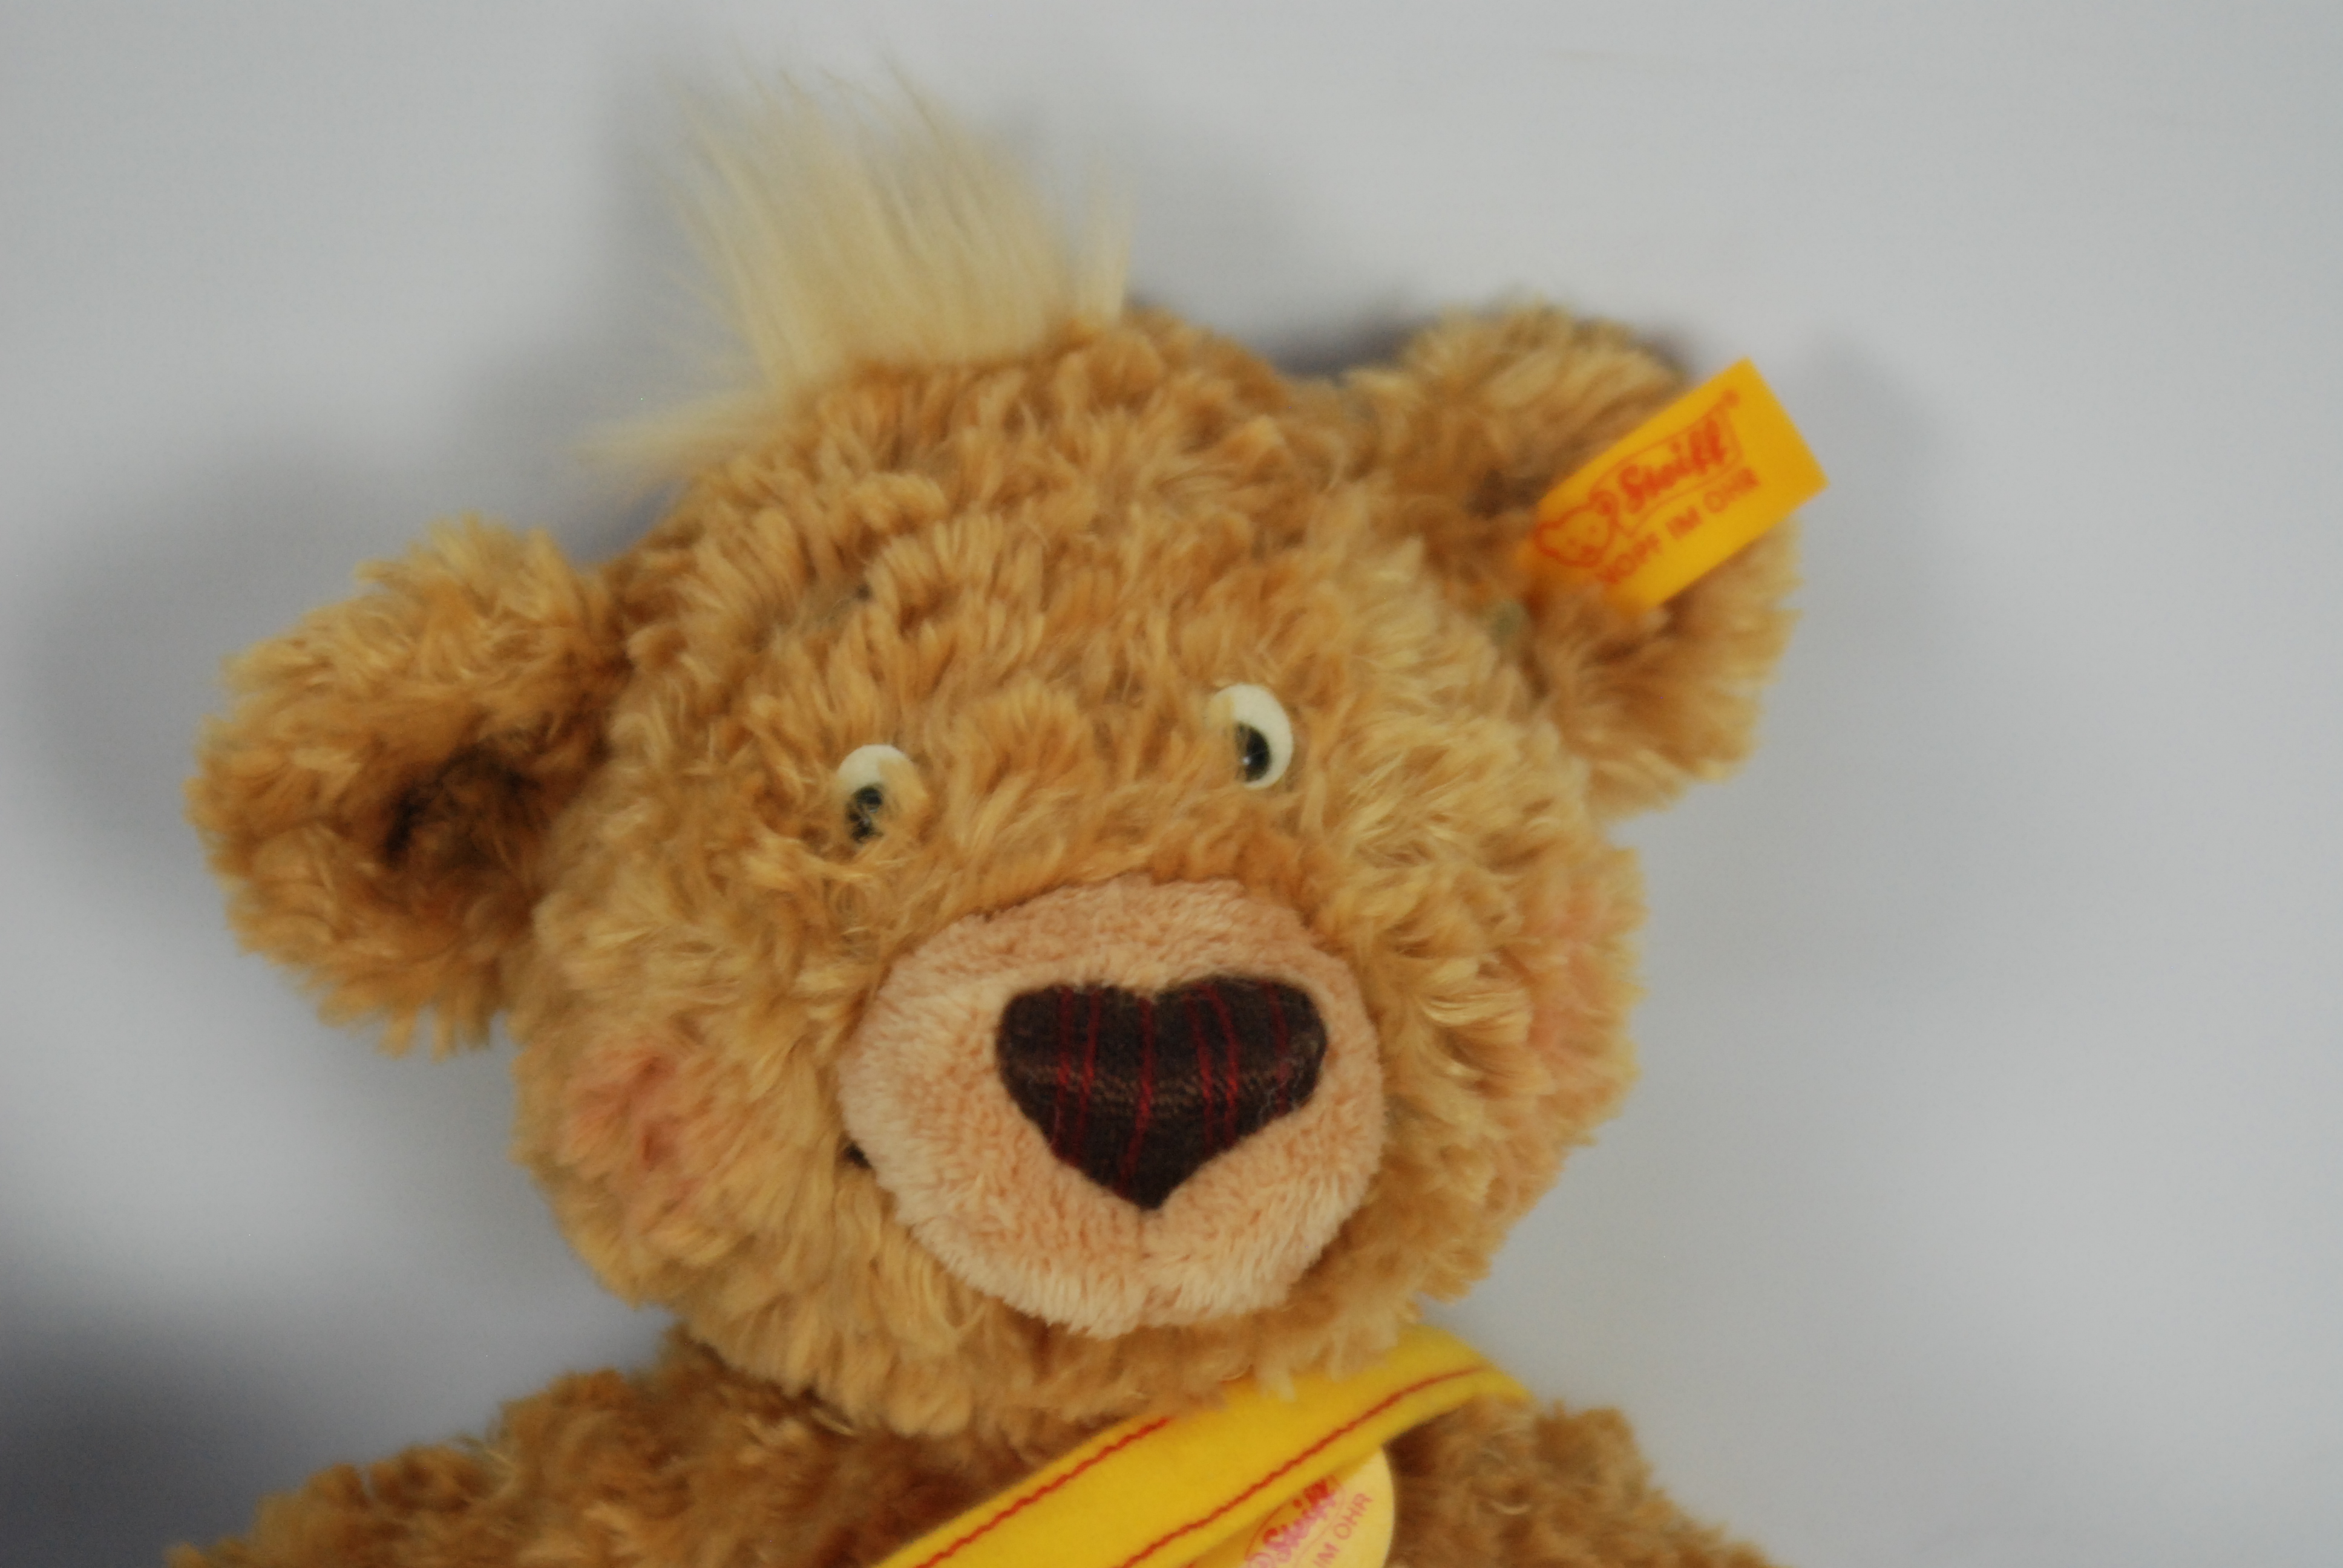 Steiff - Two Steiff bears - Lot includes a 'Jocko' monkey with yellow tag on its ear. - Image 4 of 6